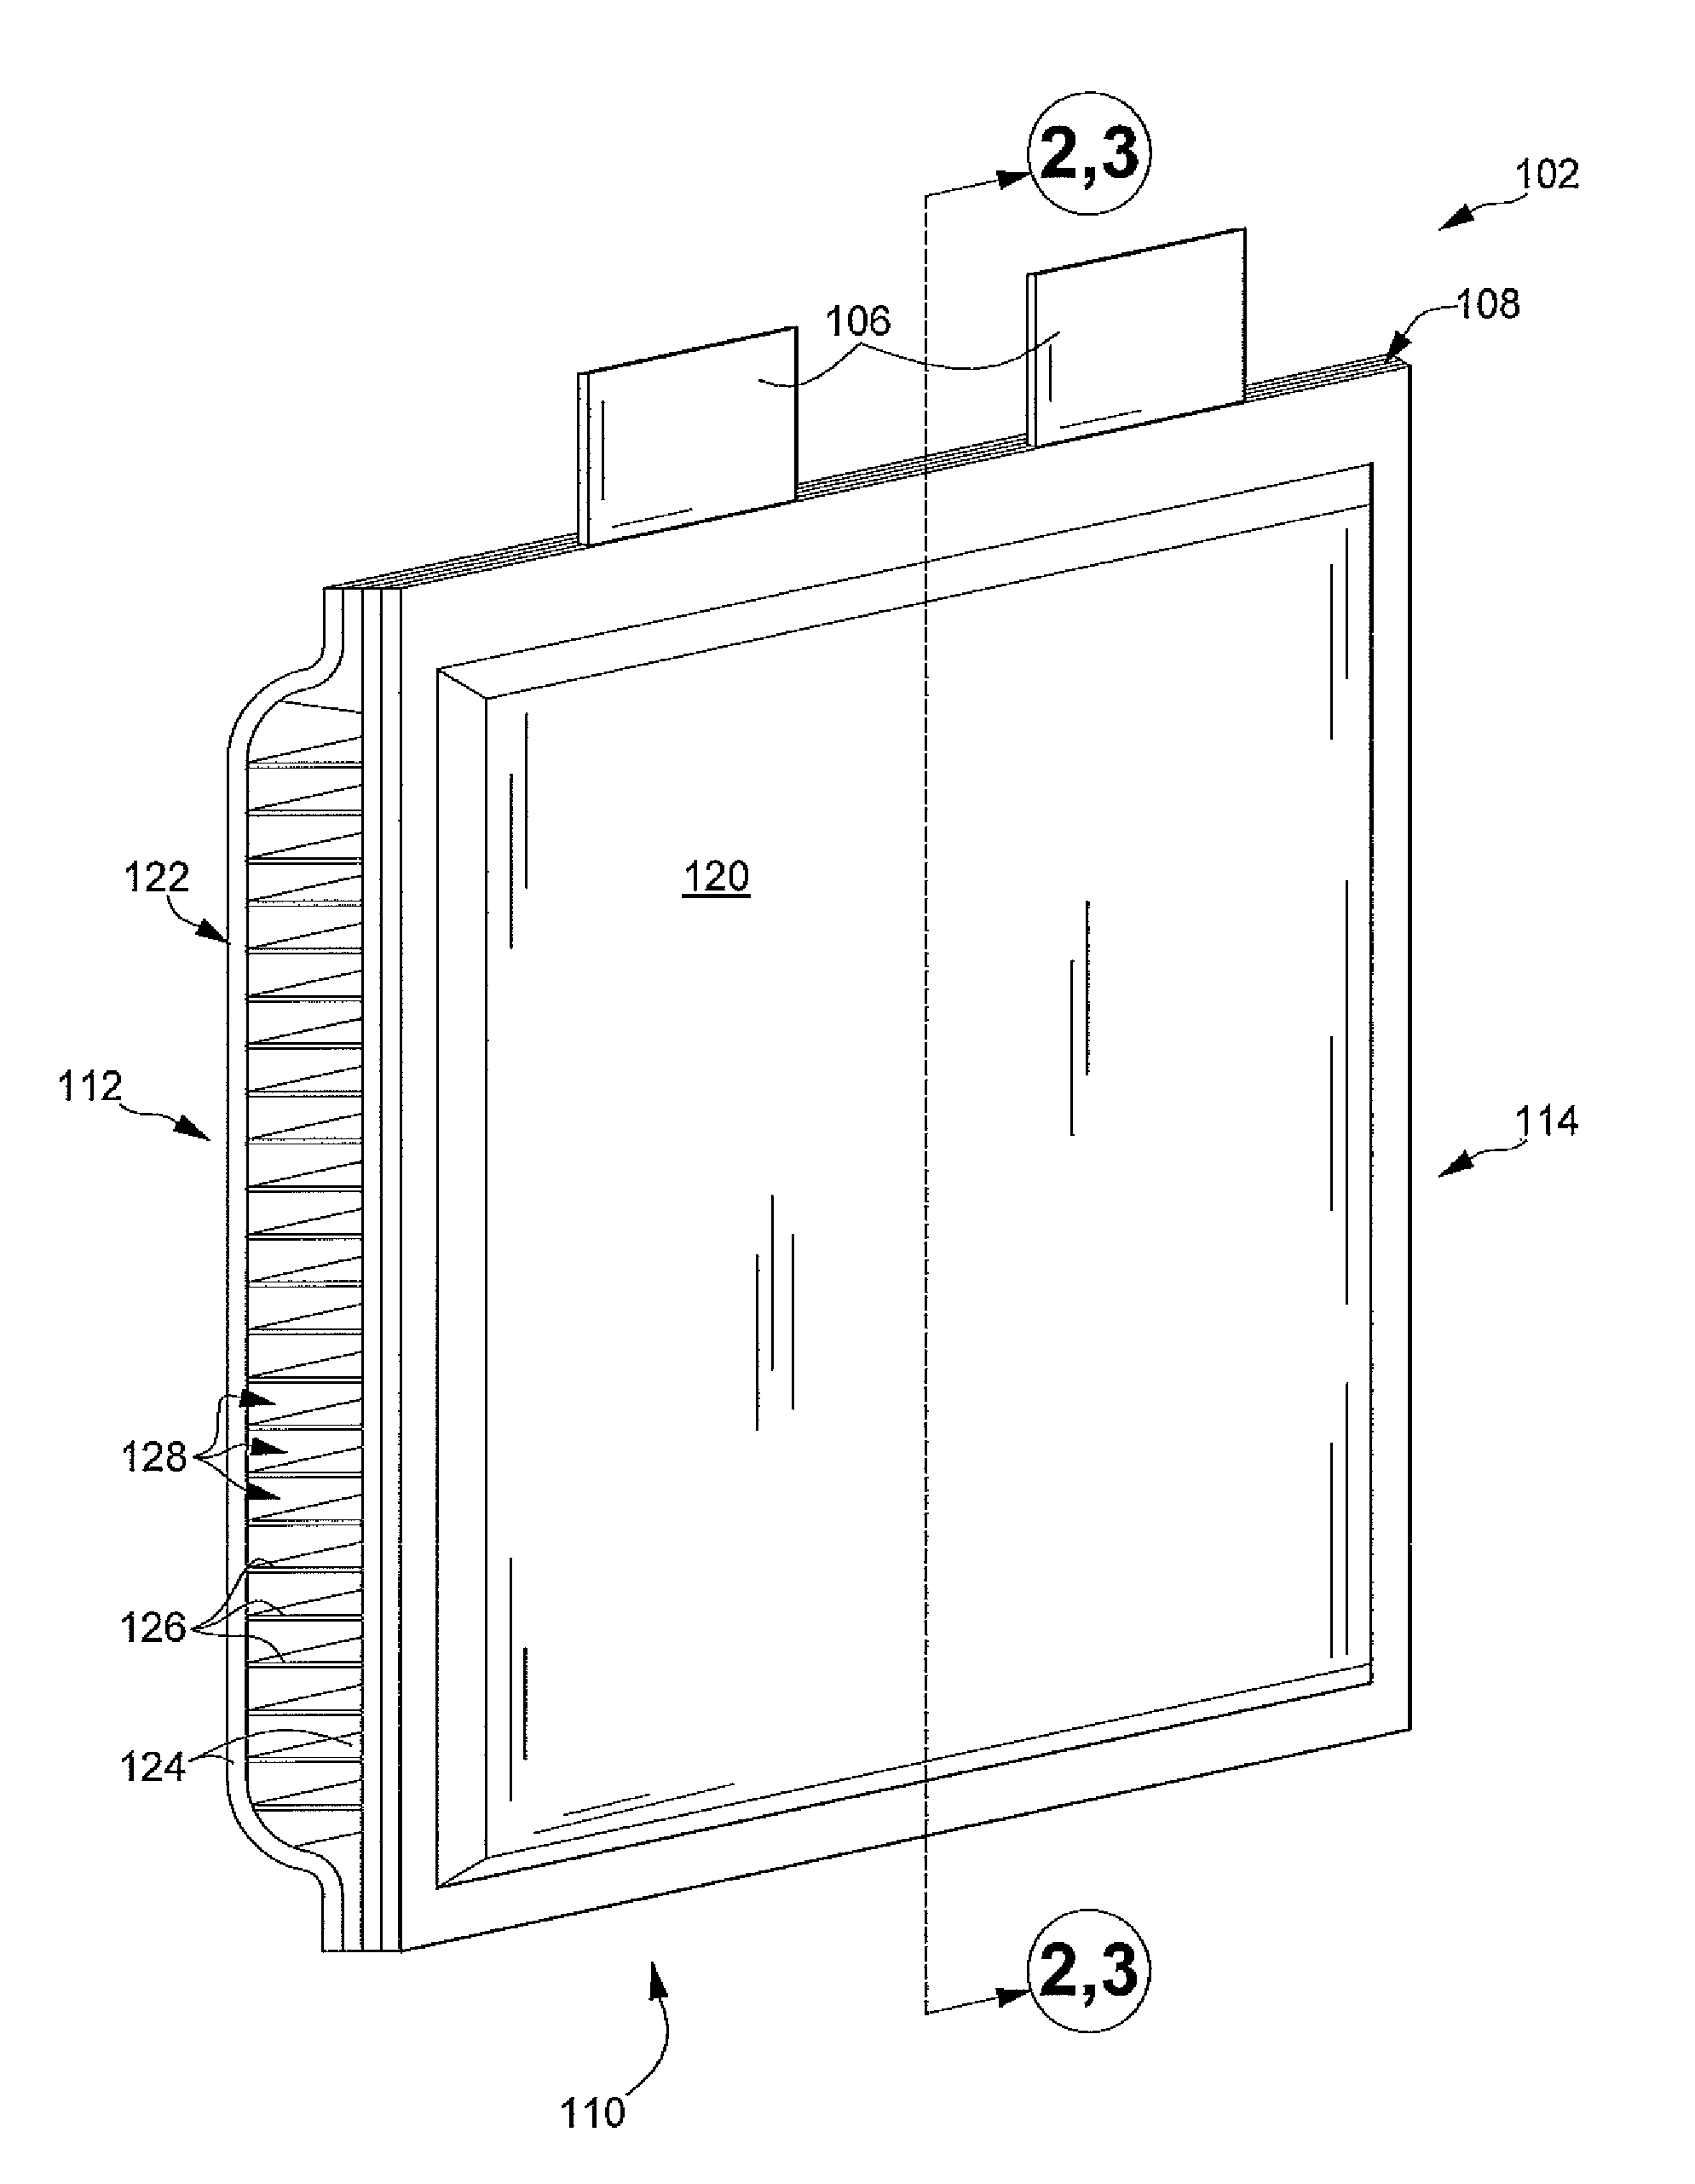 Prismatic battery cell with integrated cooling passages and assembly frame